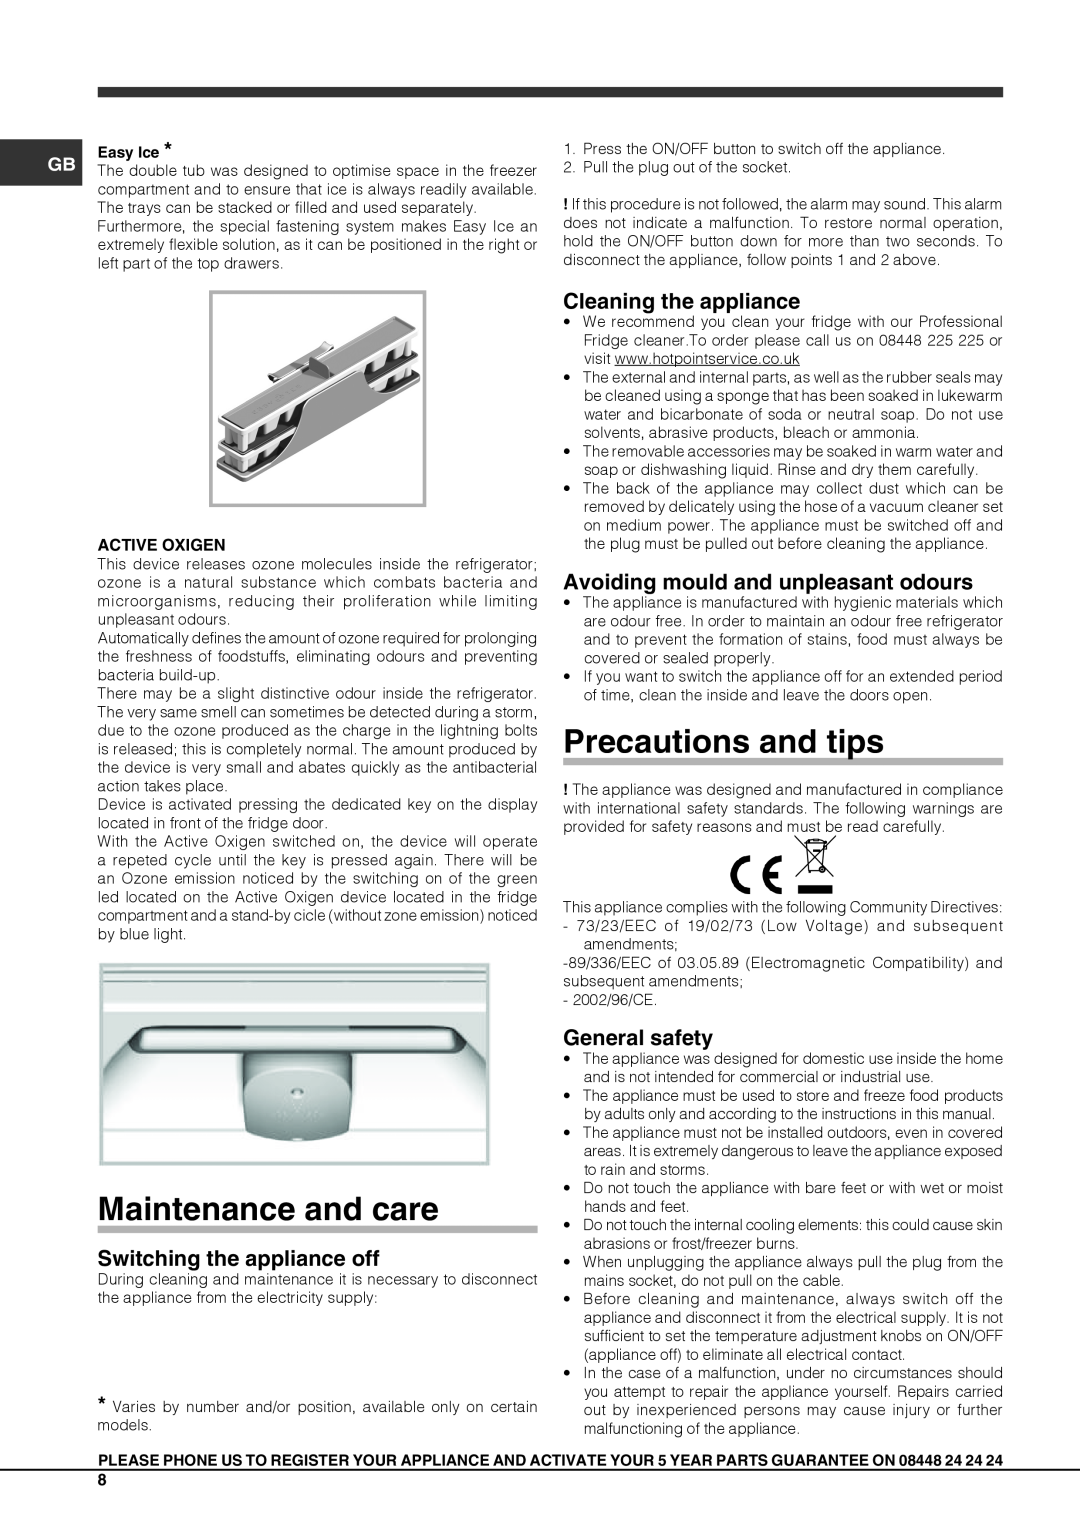 Hotpoint FFUG 20xx x O3 Maintenance and care, Precautions and tips, Switching the appliance off, Cleaning the appliance 